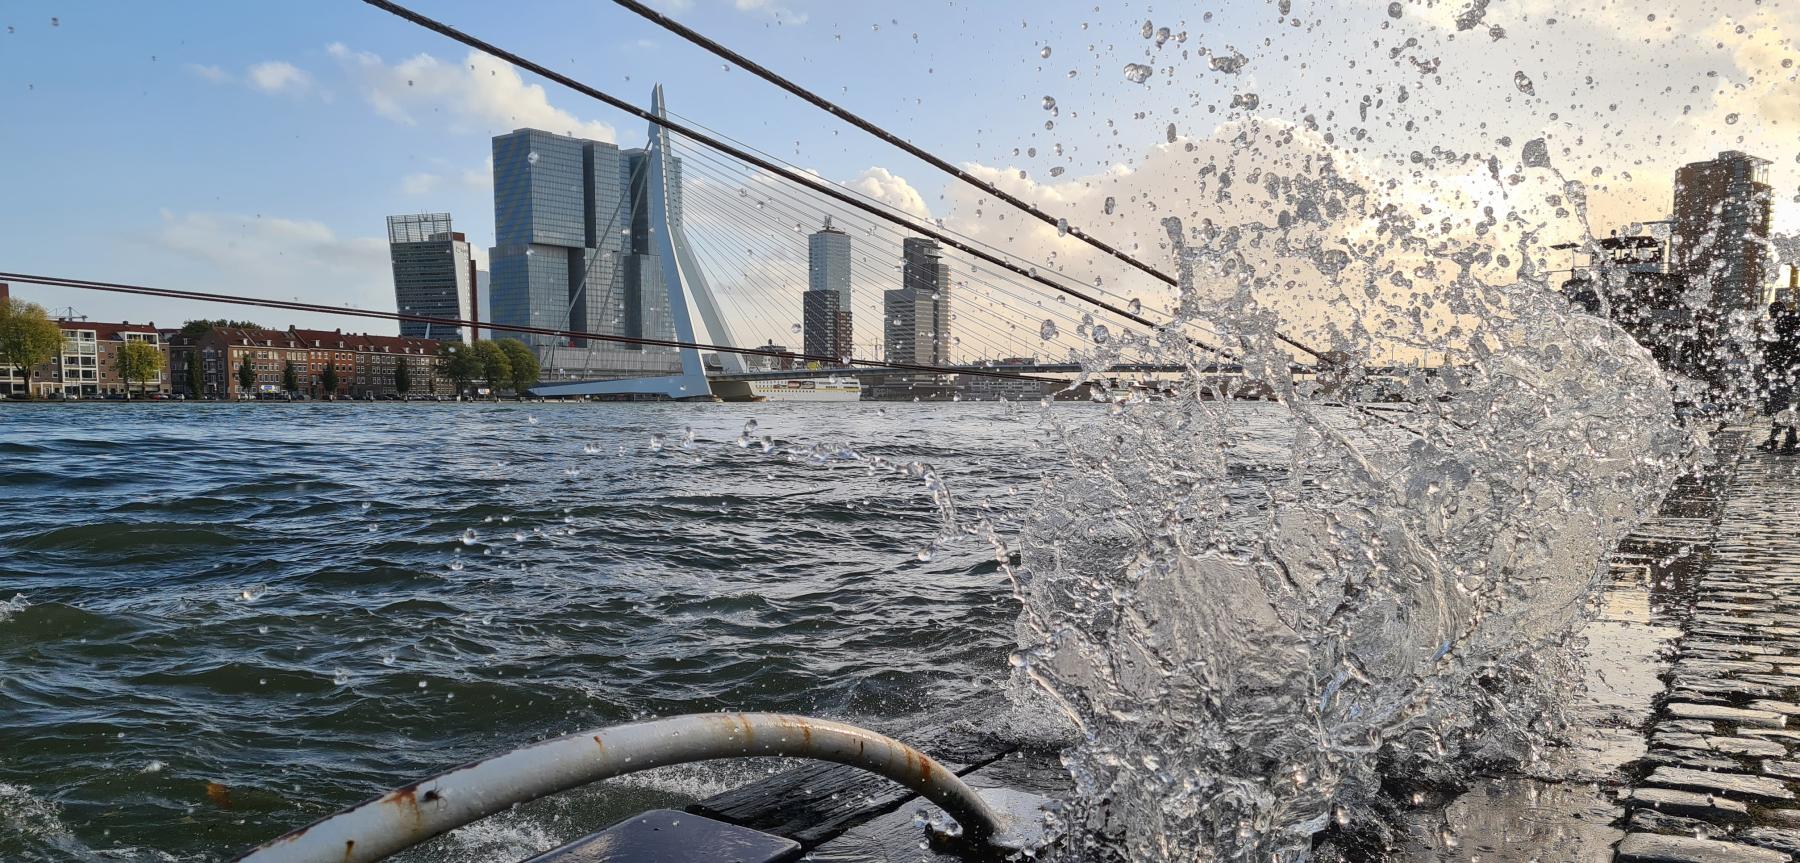 Rotterdam's landscape from water